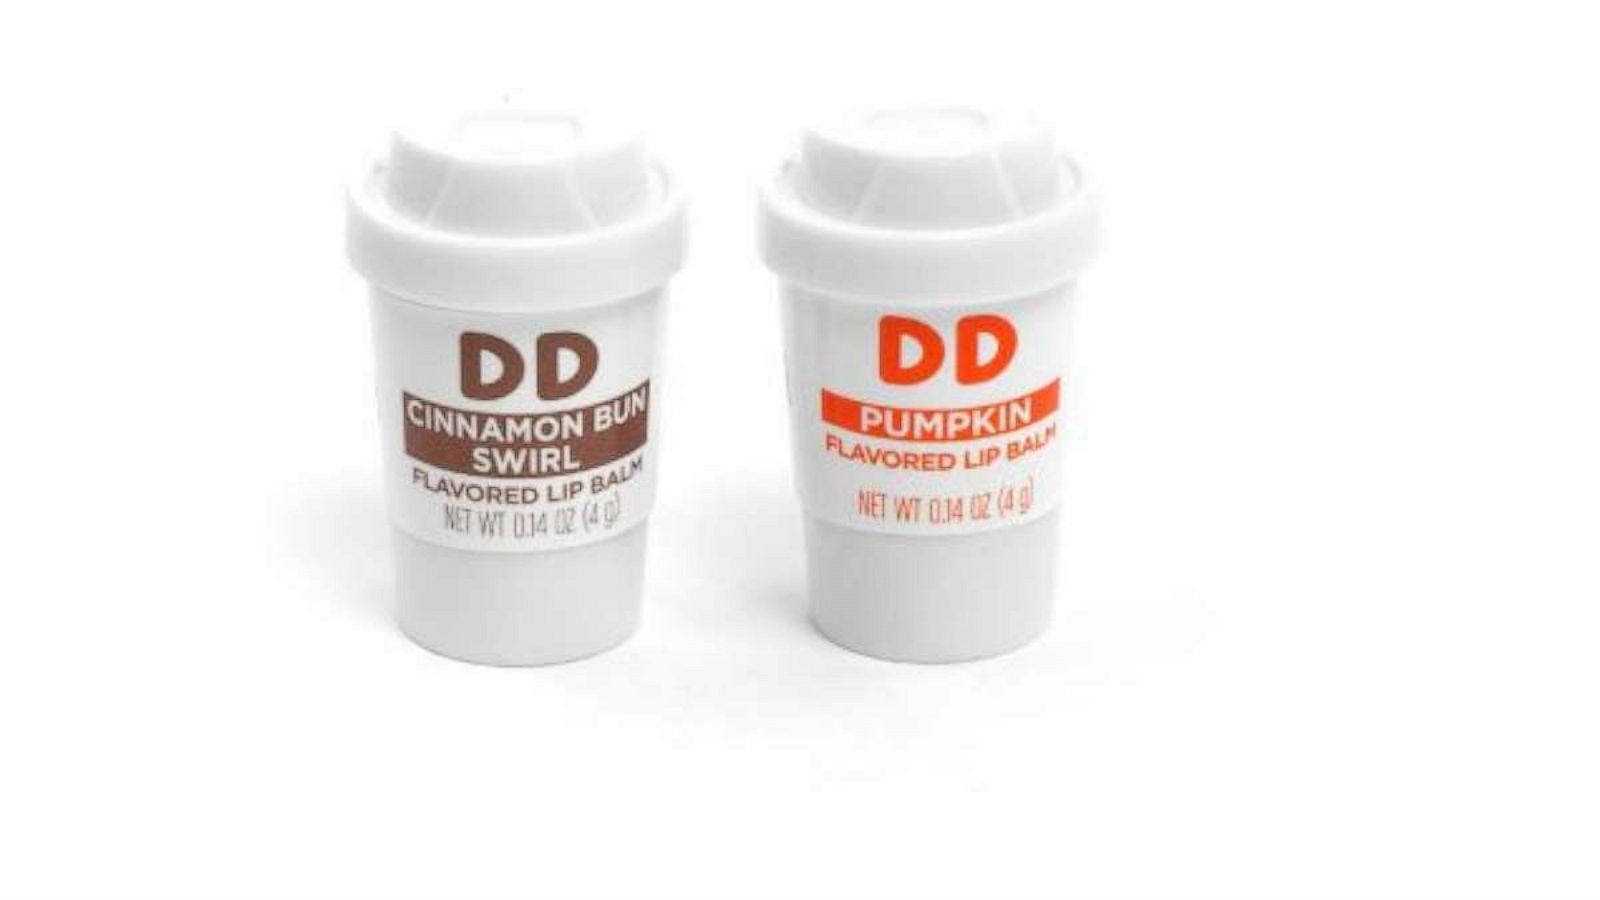 Dunkin' releases sweet duo of flavored lip balms for $5 - Good Morning  America